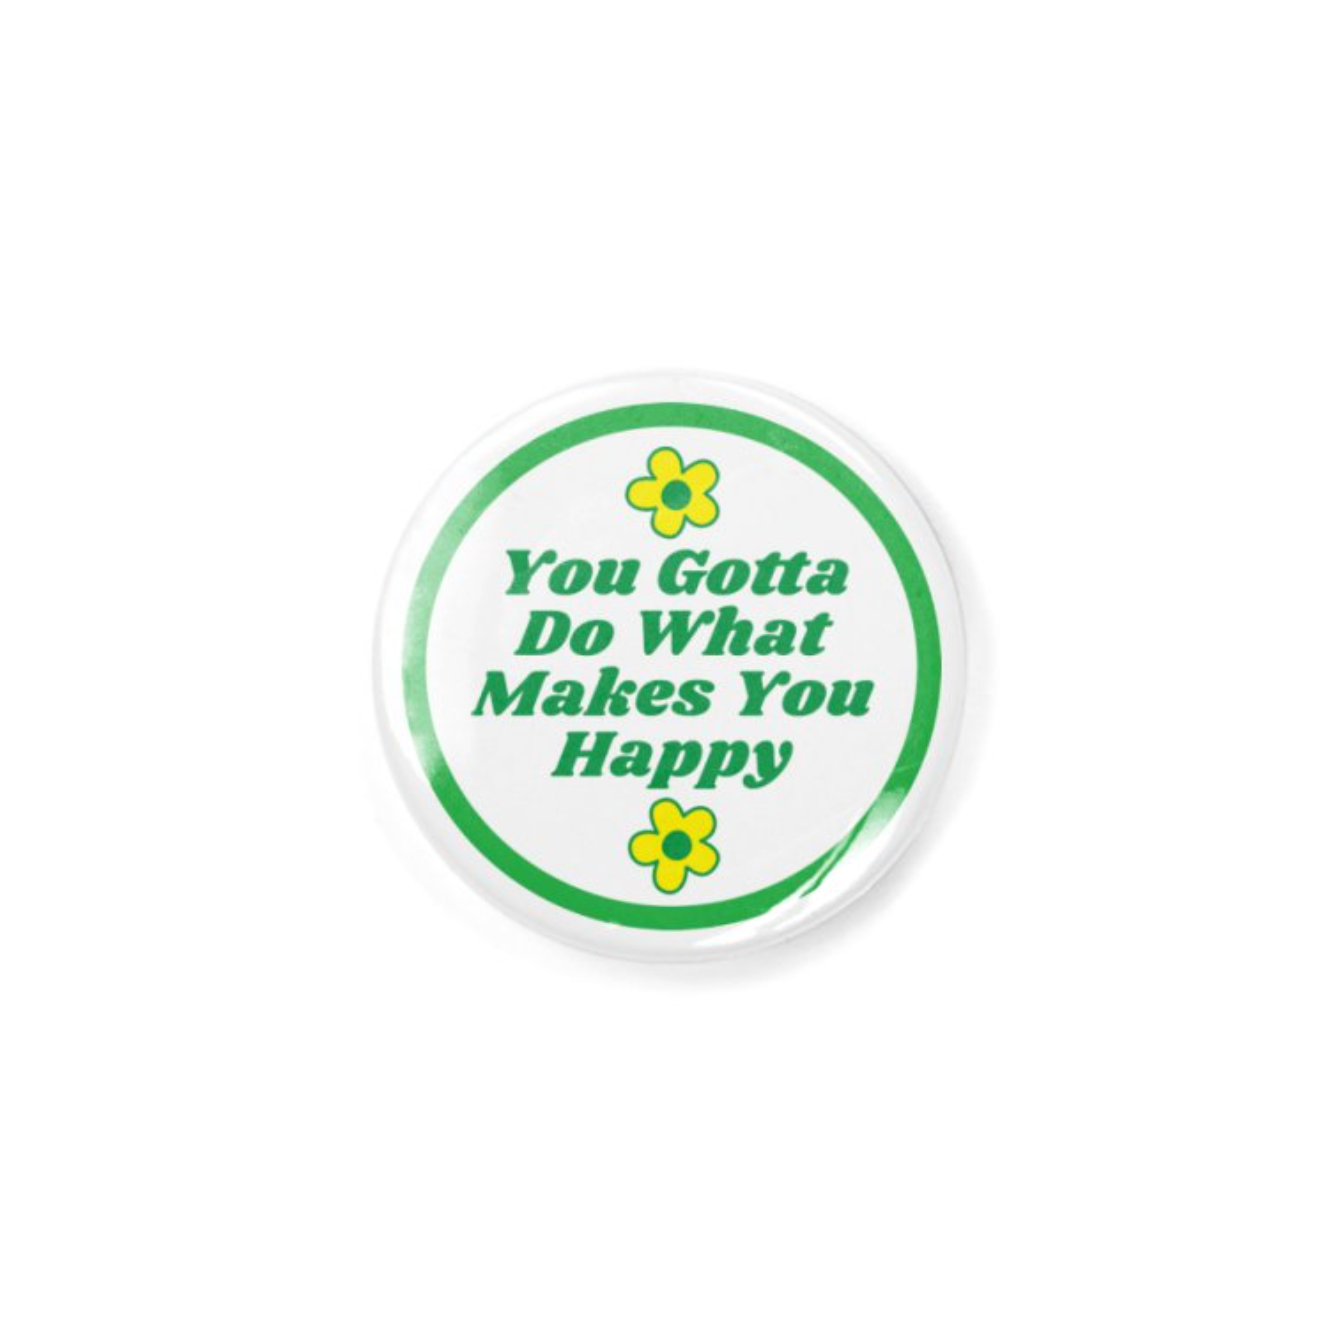 You Gotta Do What Makes You Happy - 1.25" Button